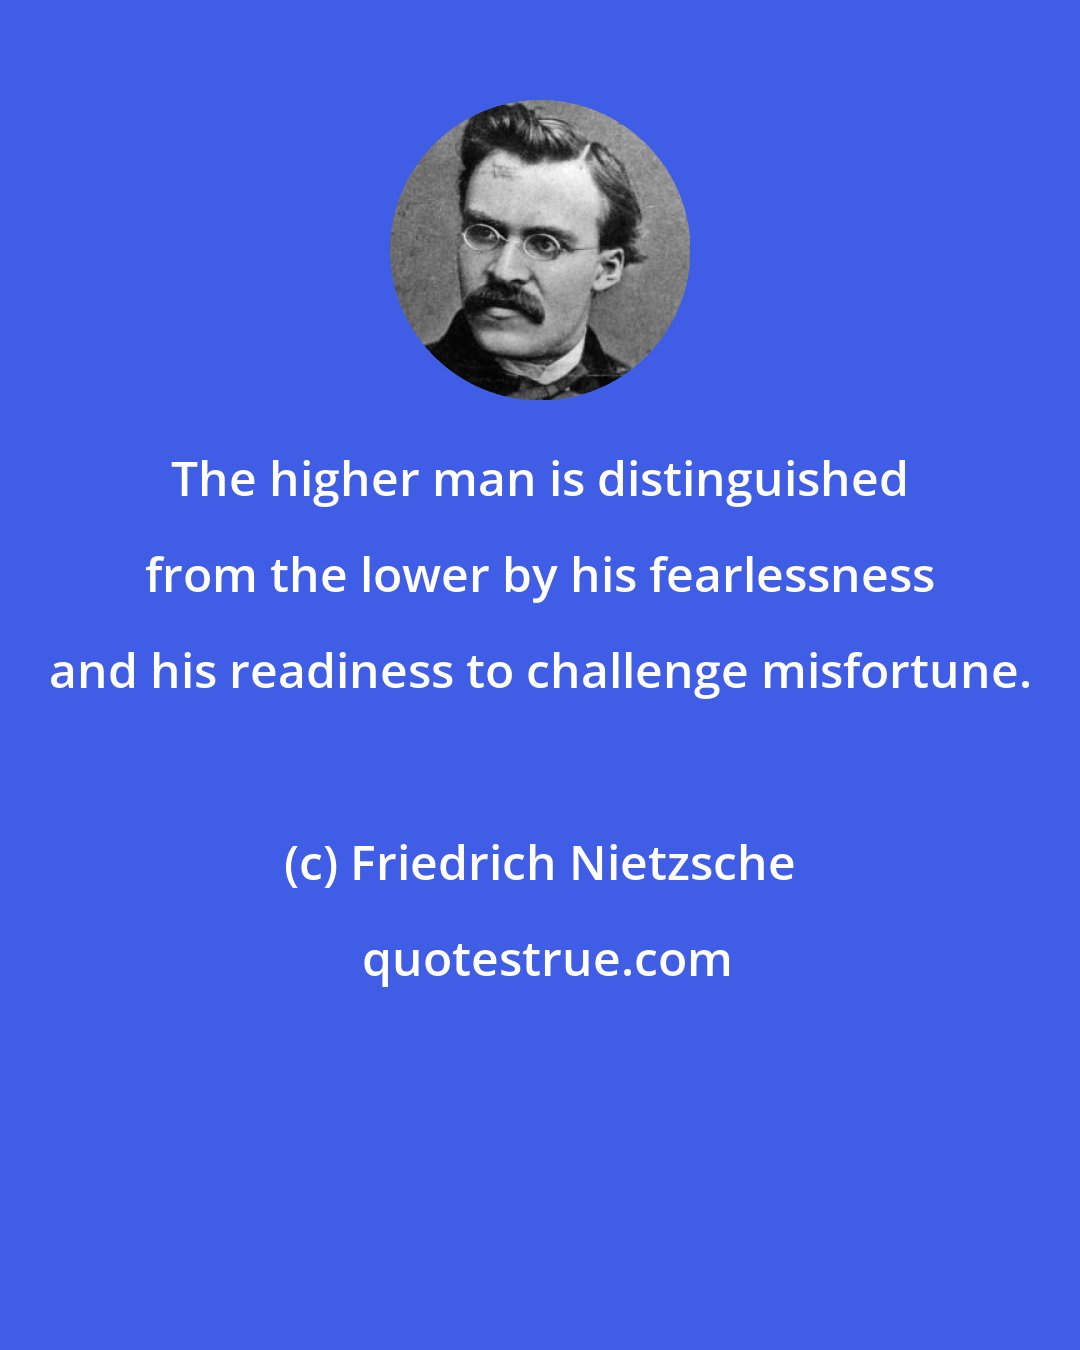 Friedrich Nietzsche: The higher man is distinguished from the lower by his fearlessness and his readiness to challenge misfortune.